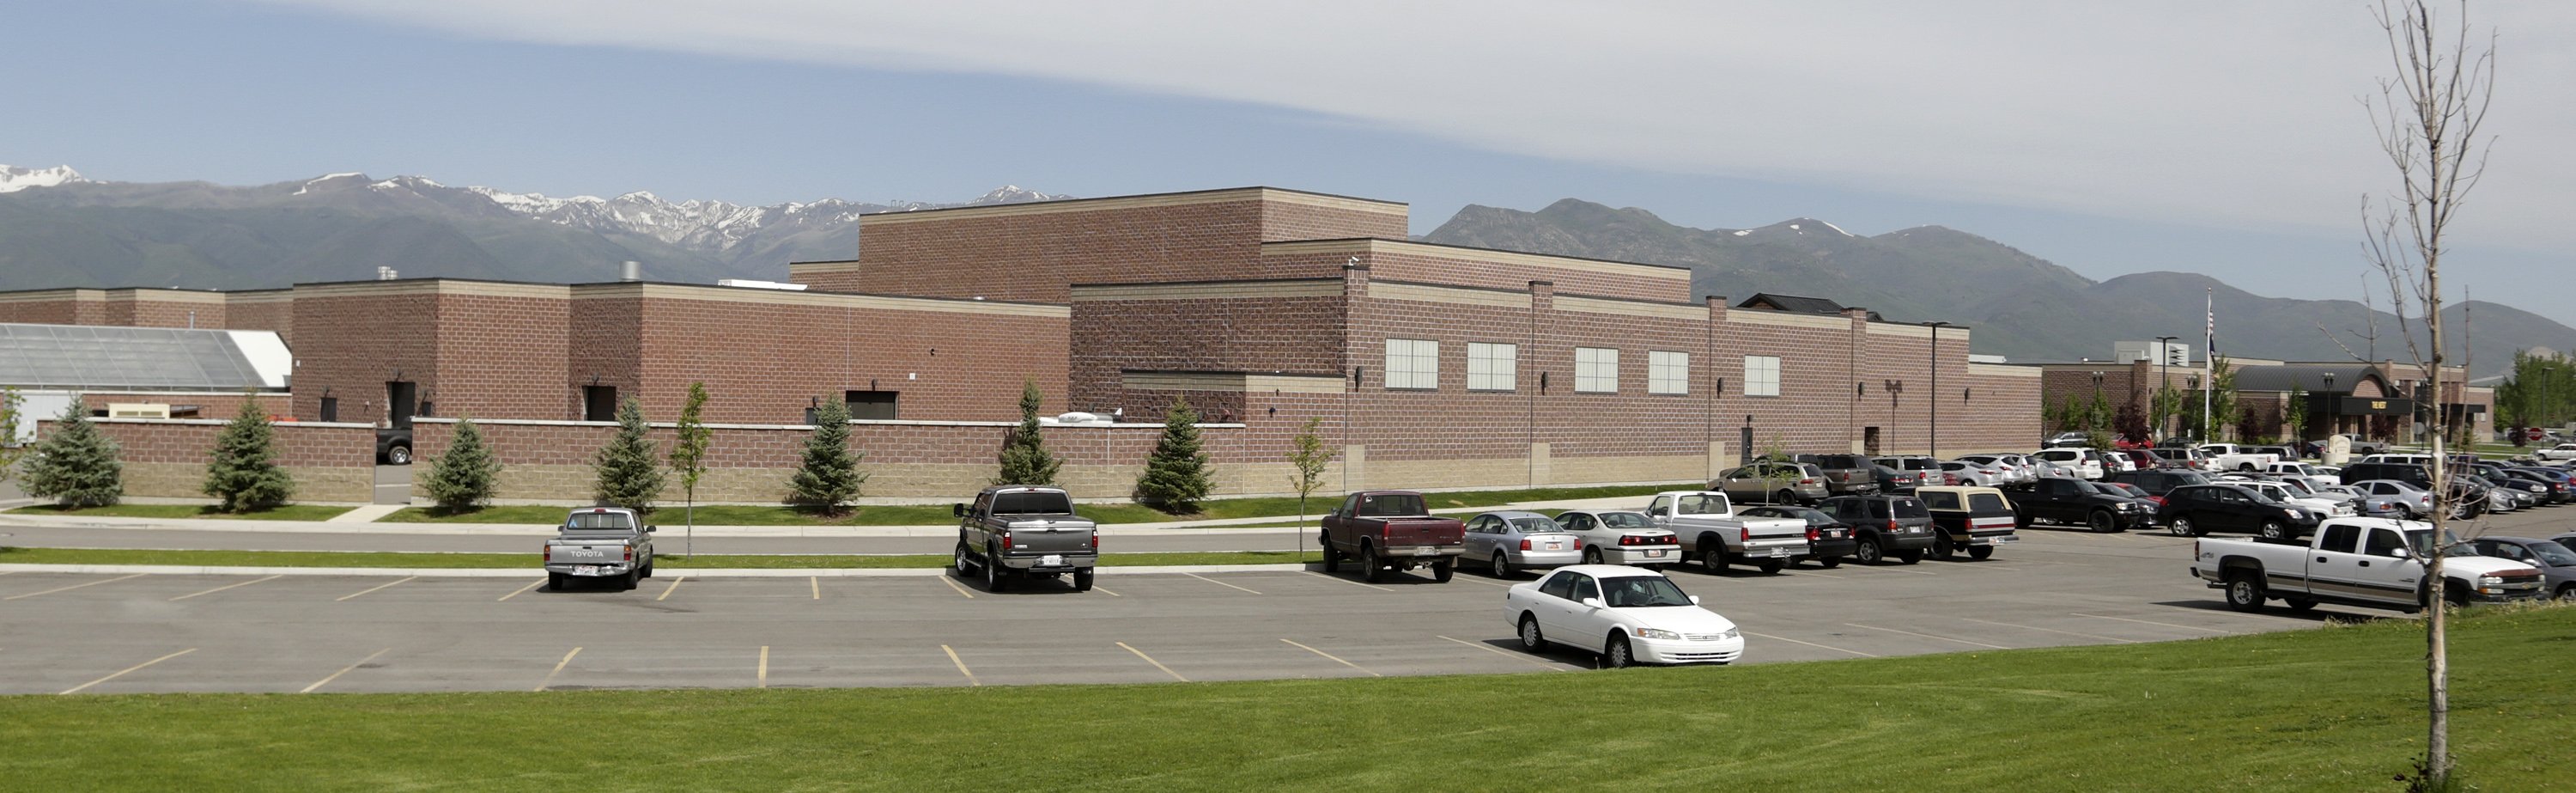 The Wasatch High School is shown Thursday, May 29, 2014, in Heber City, in Utah. (Rick Bowmer—AP)